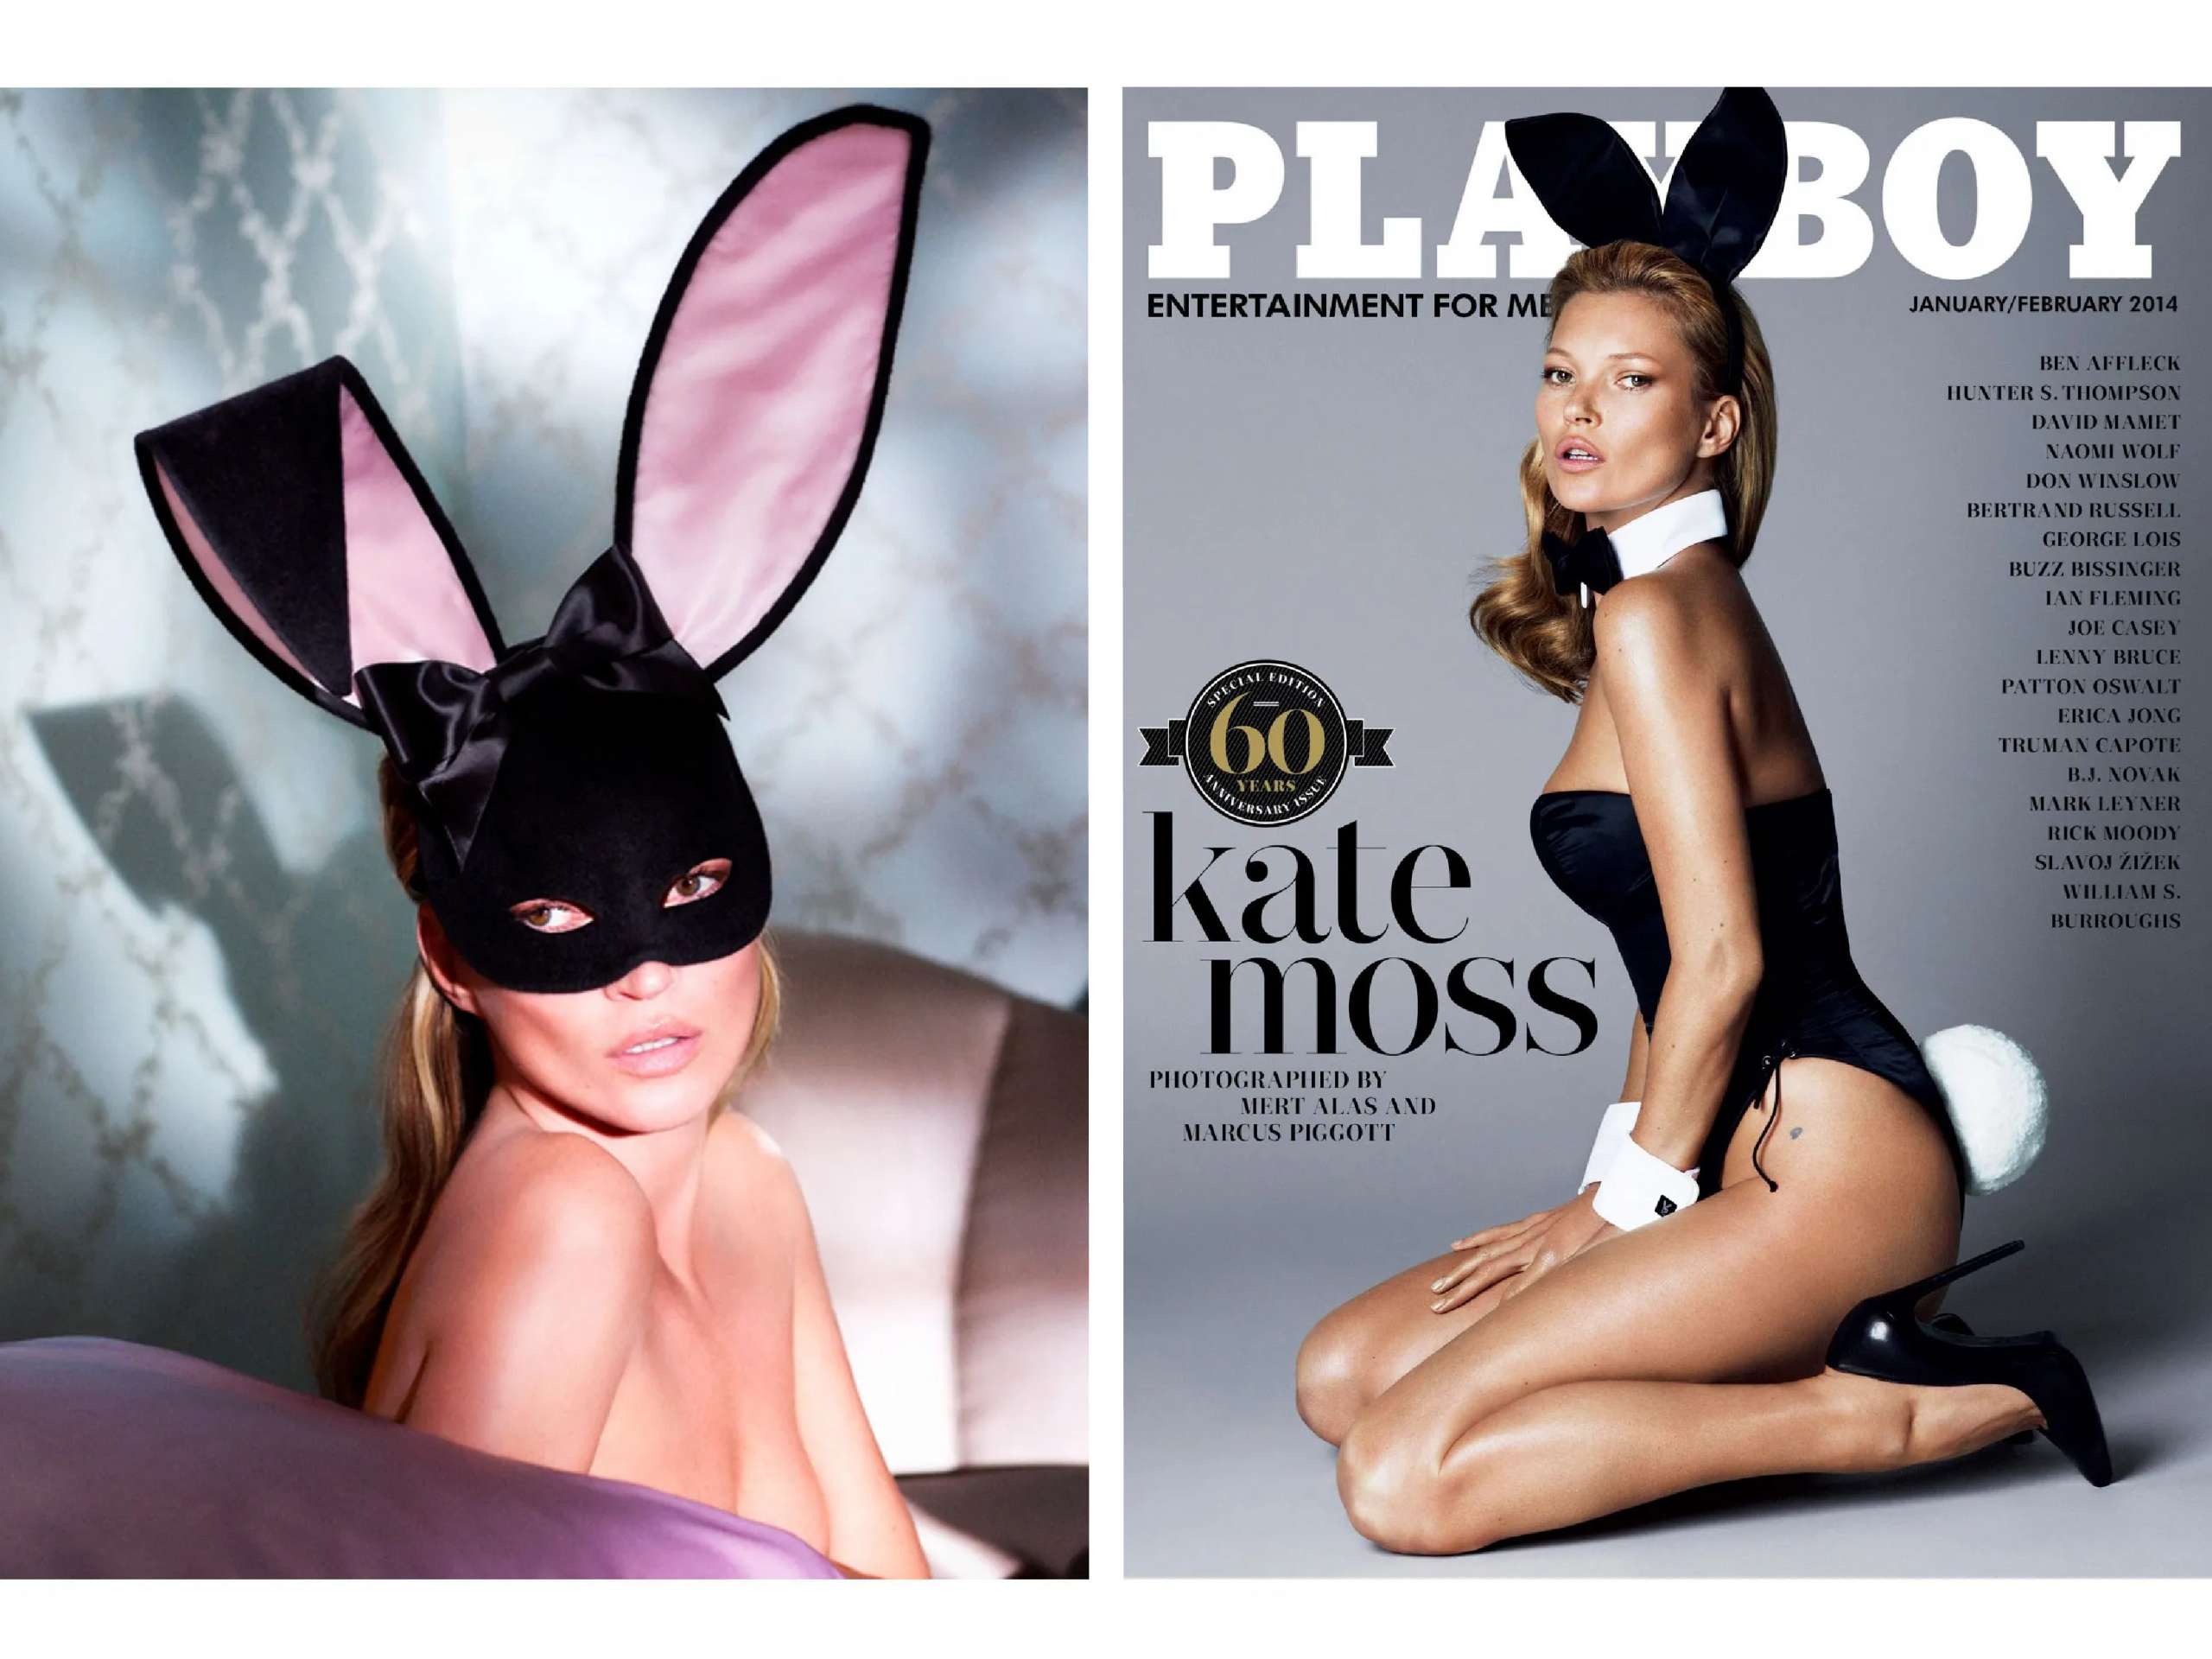 （ Kate Moss on Playboy Cover ）